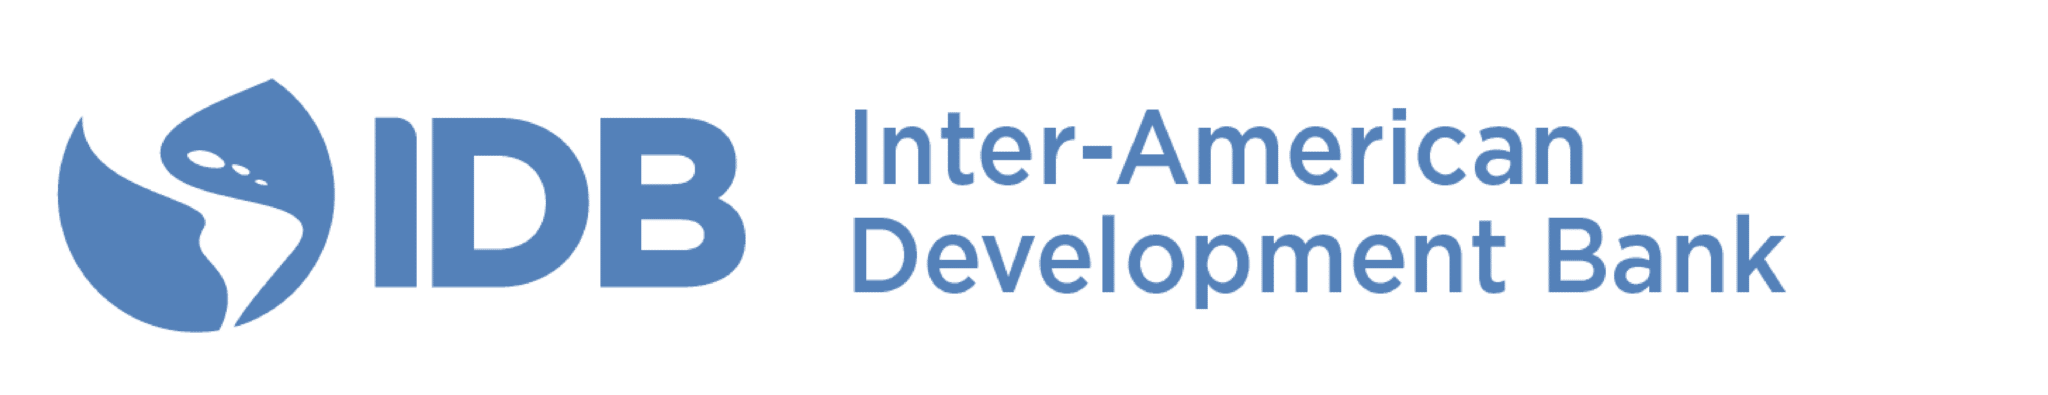 IDB Inter-American Development Bank – Office of Institutional Integrity